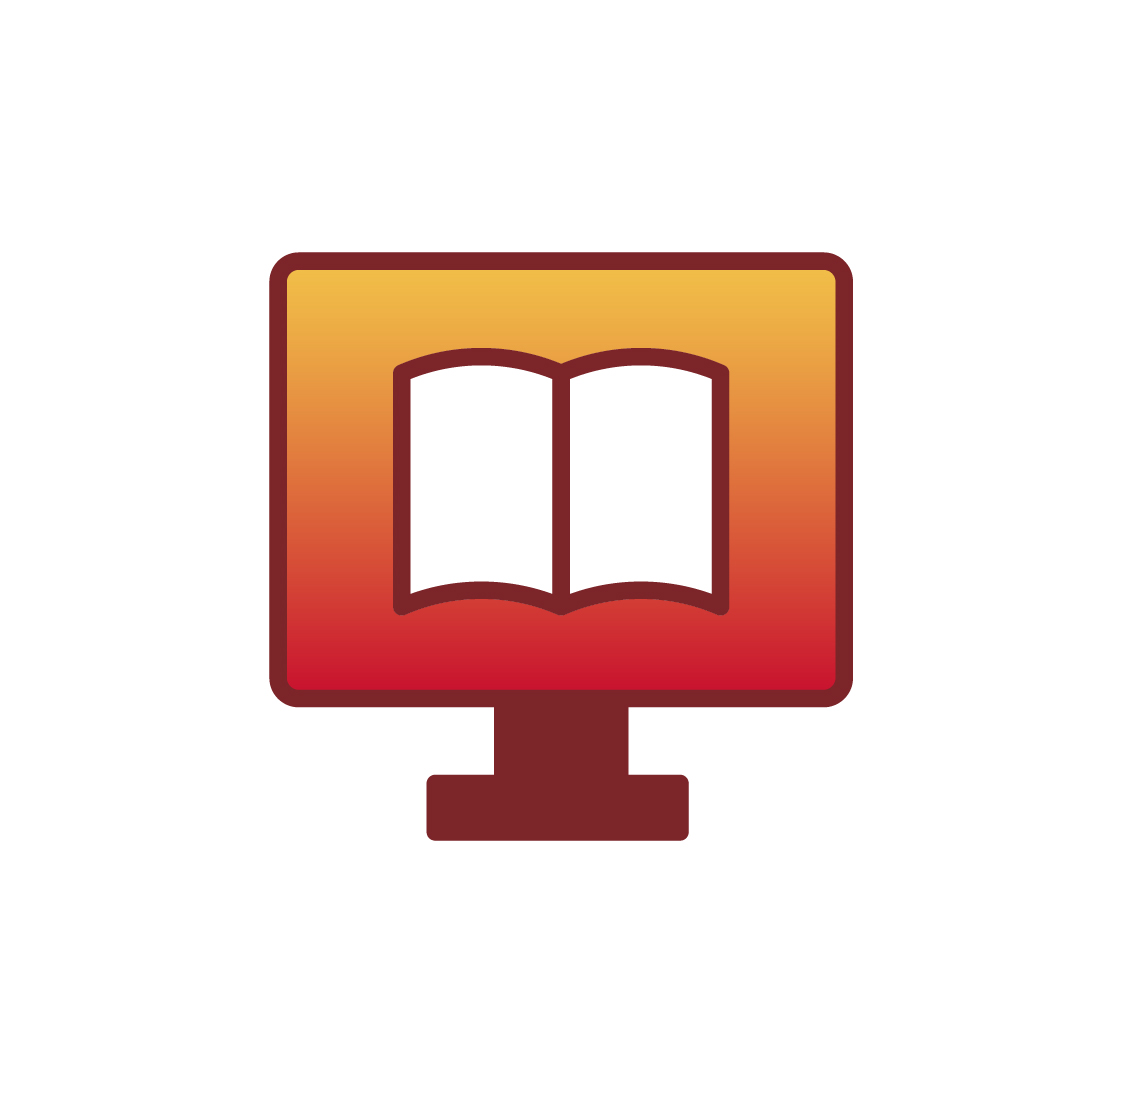 Illustrated icon of online learning